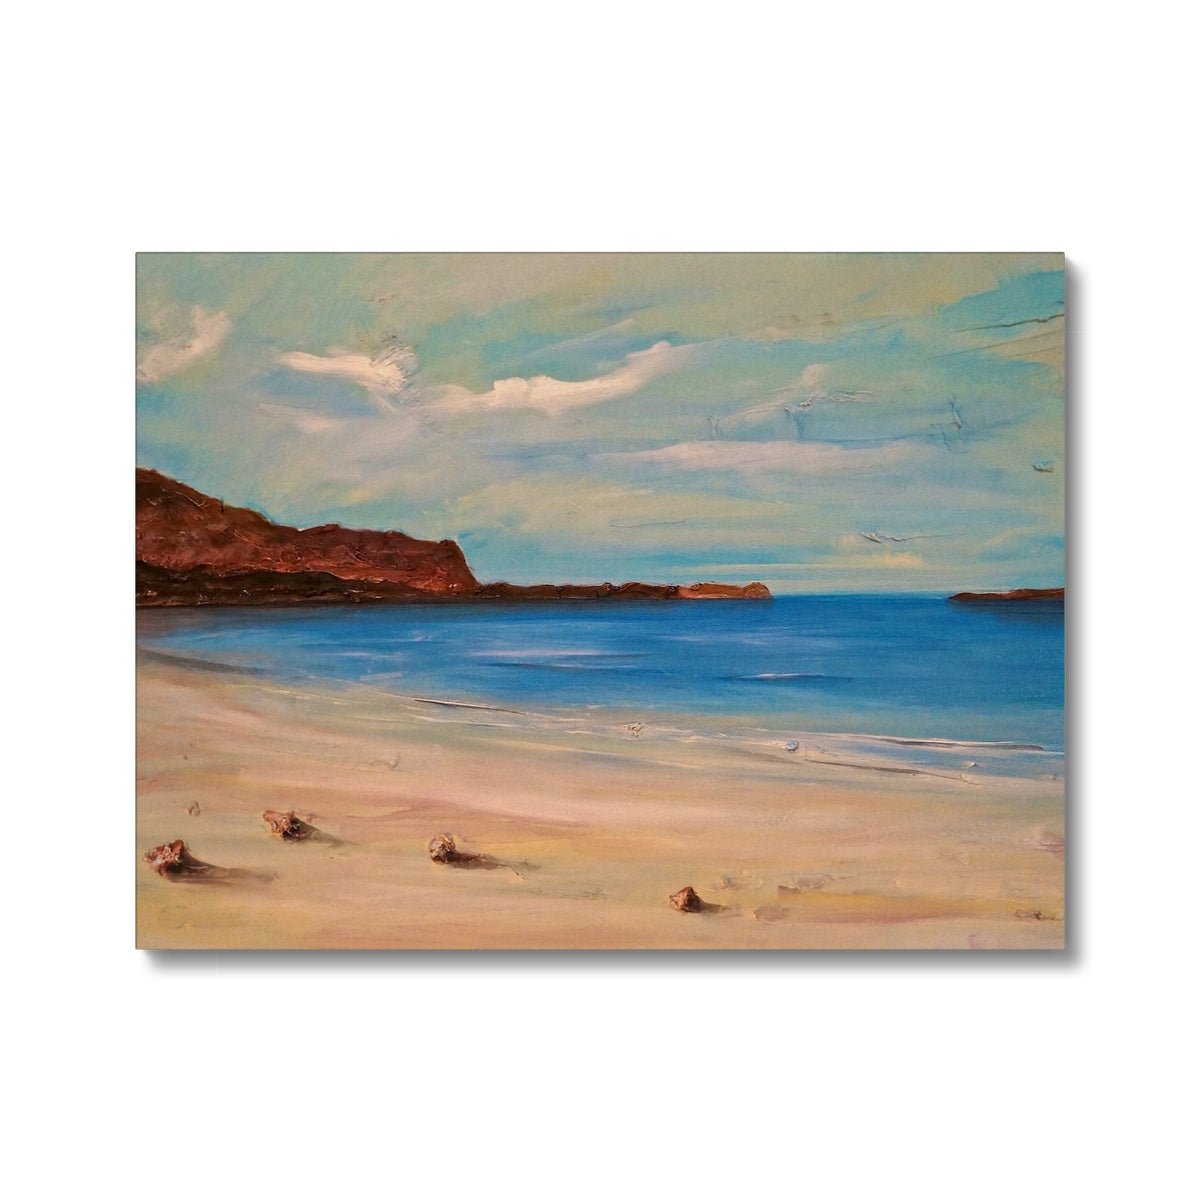 Bosta Beach Lewis Painting | Canvas From Scotland-Contemporary Stretched Canvas Prints-Hebridean Islands Art Gallery-24"x18"-Paintings, Prints, Homeware, Art Gifts From Scotland By Scottish Artist Kevin Hunter